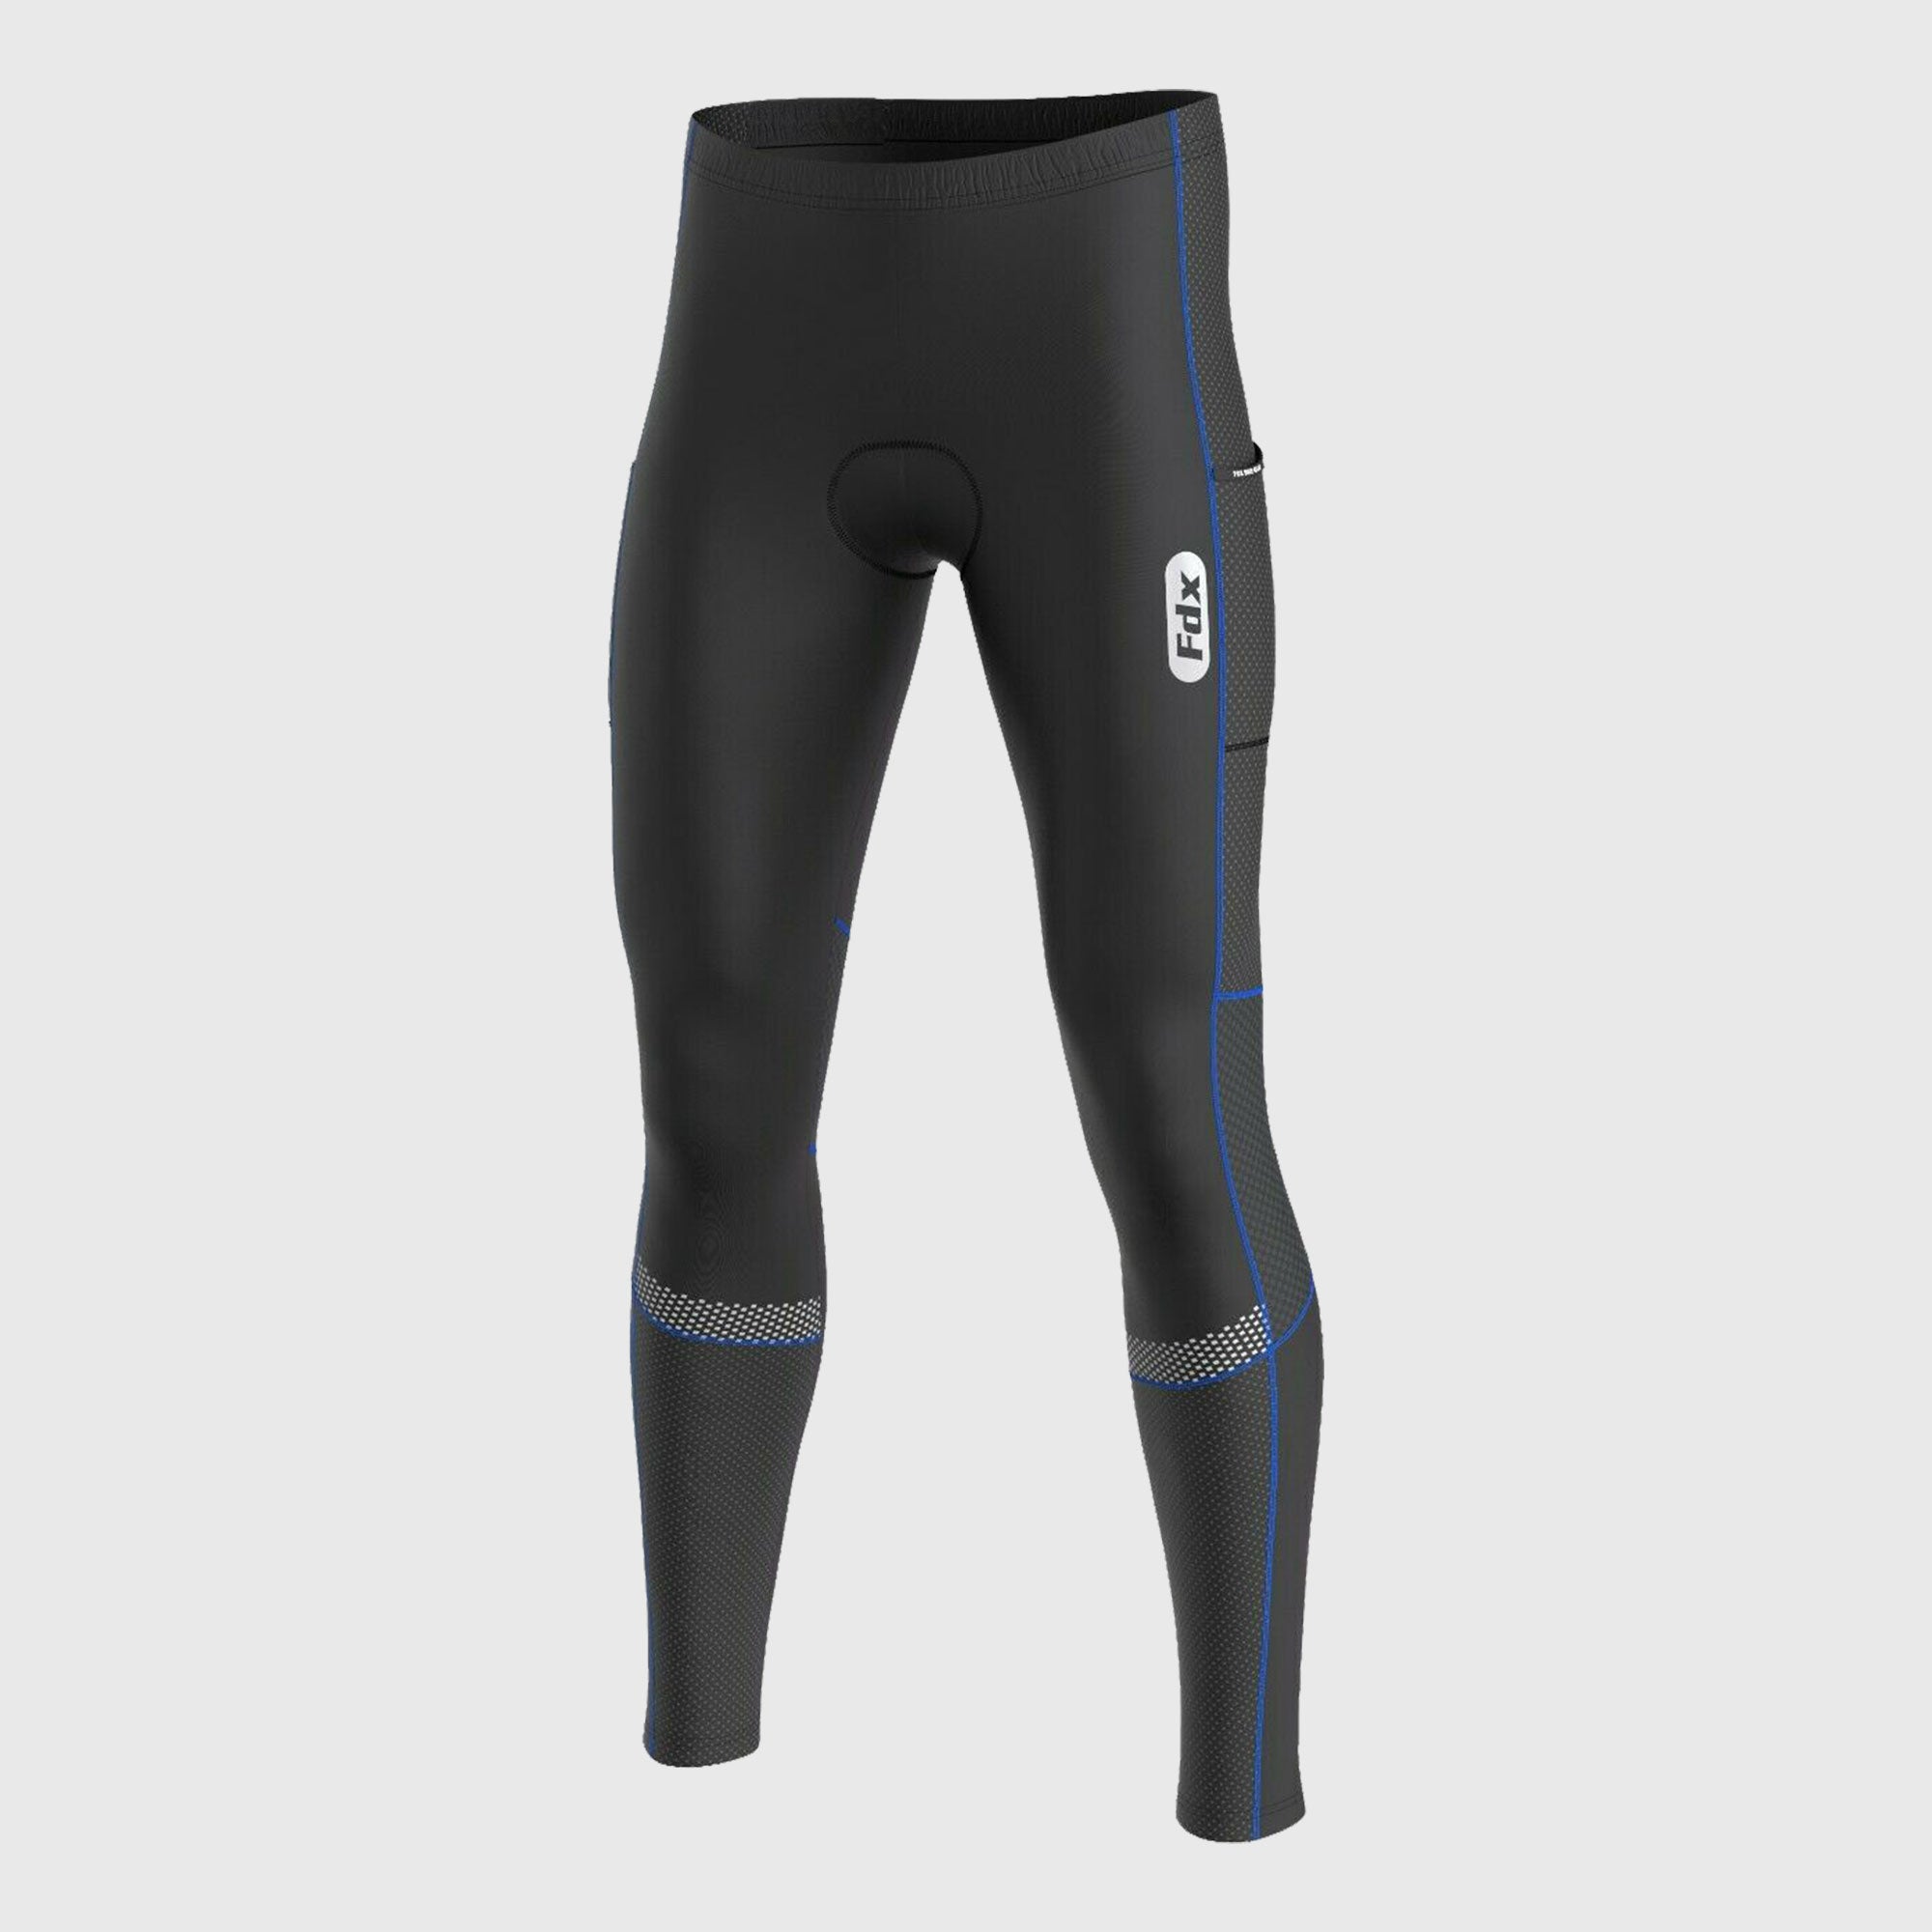 FDX Men?s Thermal Cycling Tights, 3D Padded, Water Resistant, Lightwei –